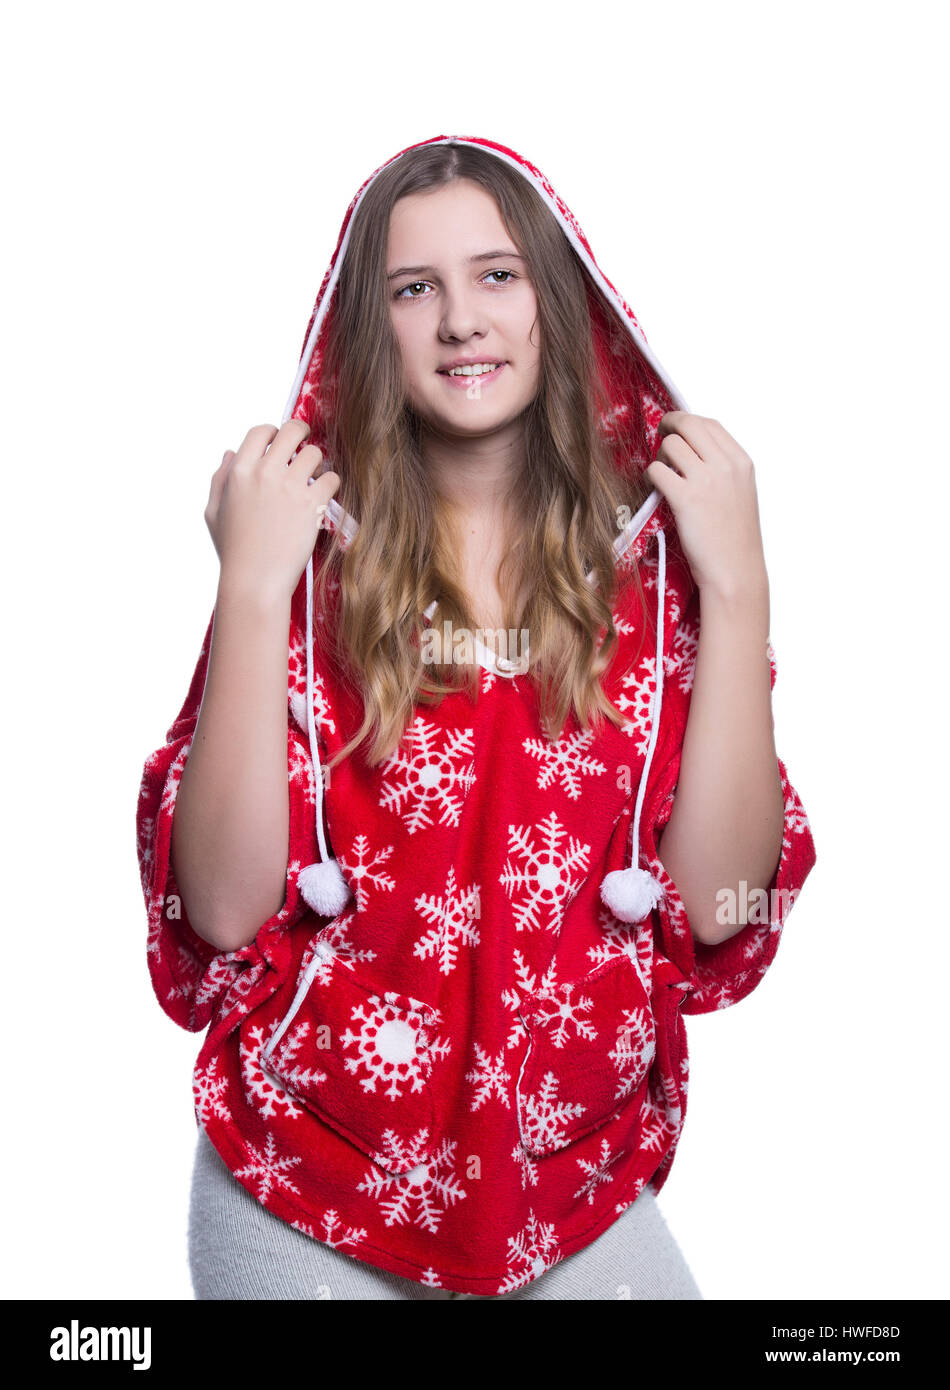 Lovely cheerful teenage girl posing in the studio. Wearing red winter hoodie with snowflakes. Isolated on white background. Winter clothes Stock Photo